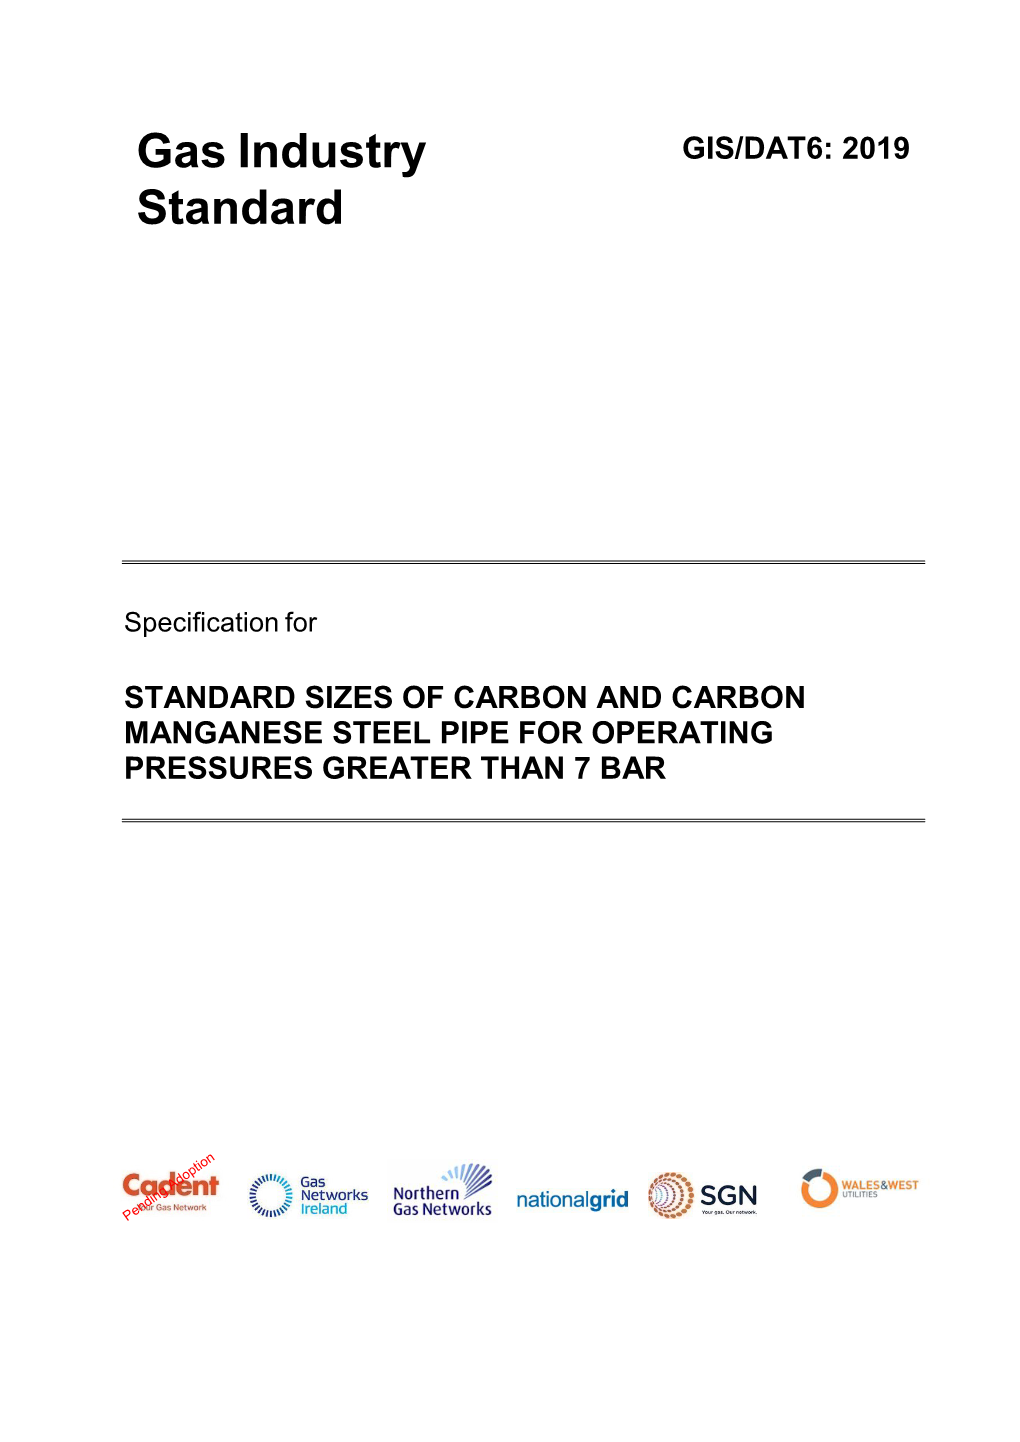 Gas Industry Standards (GIS) Are Revised, When Necessary, by the Issue of New Editions